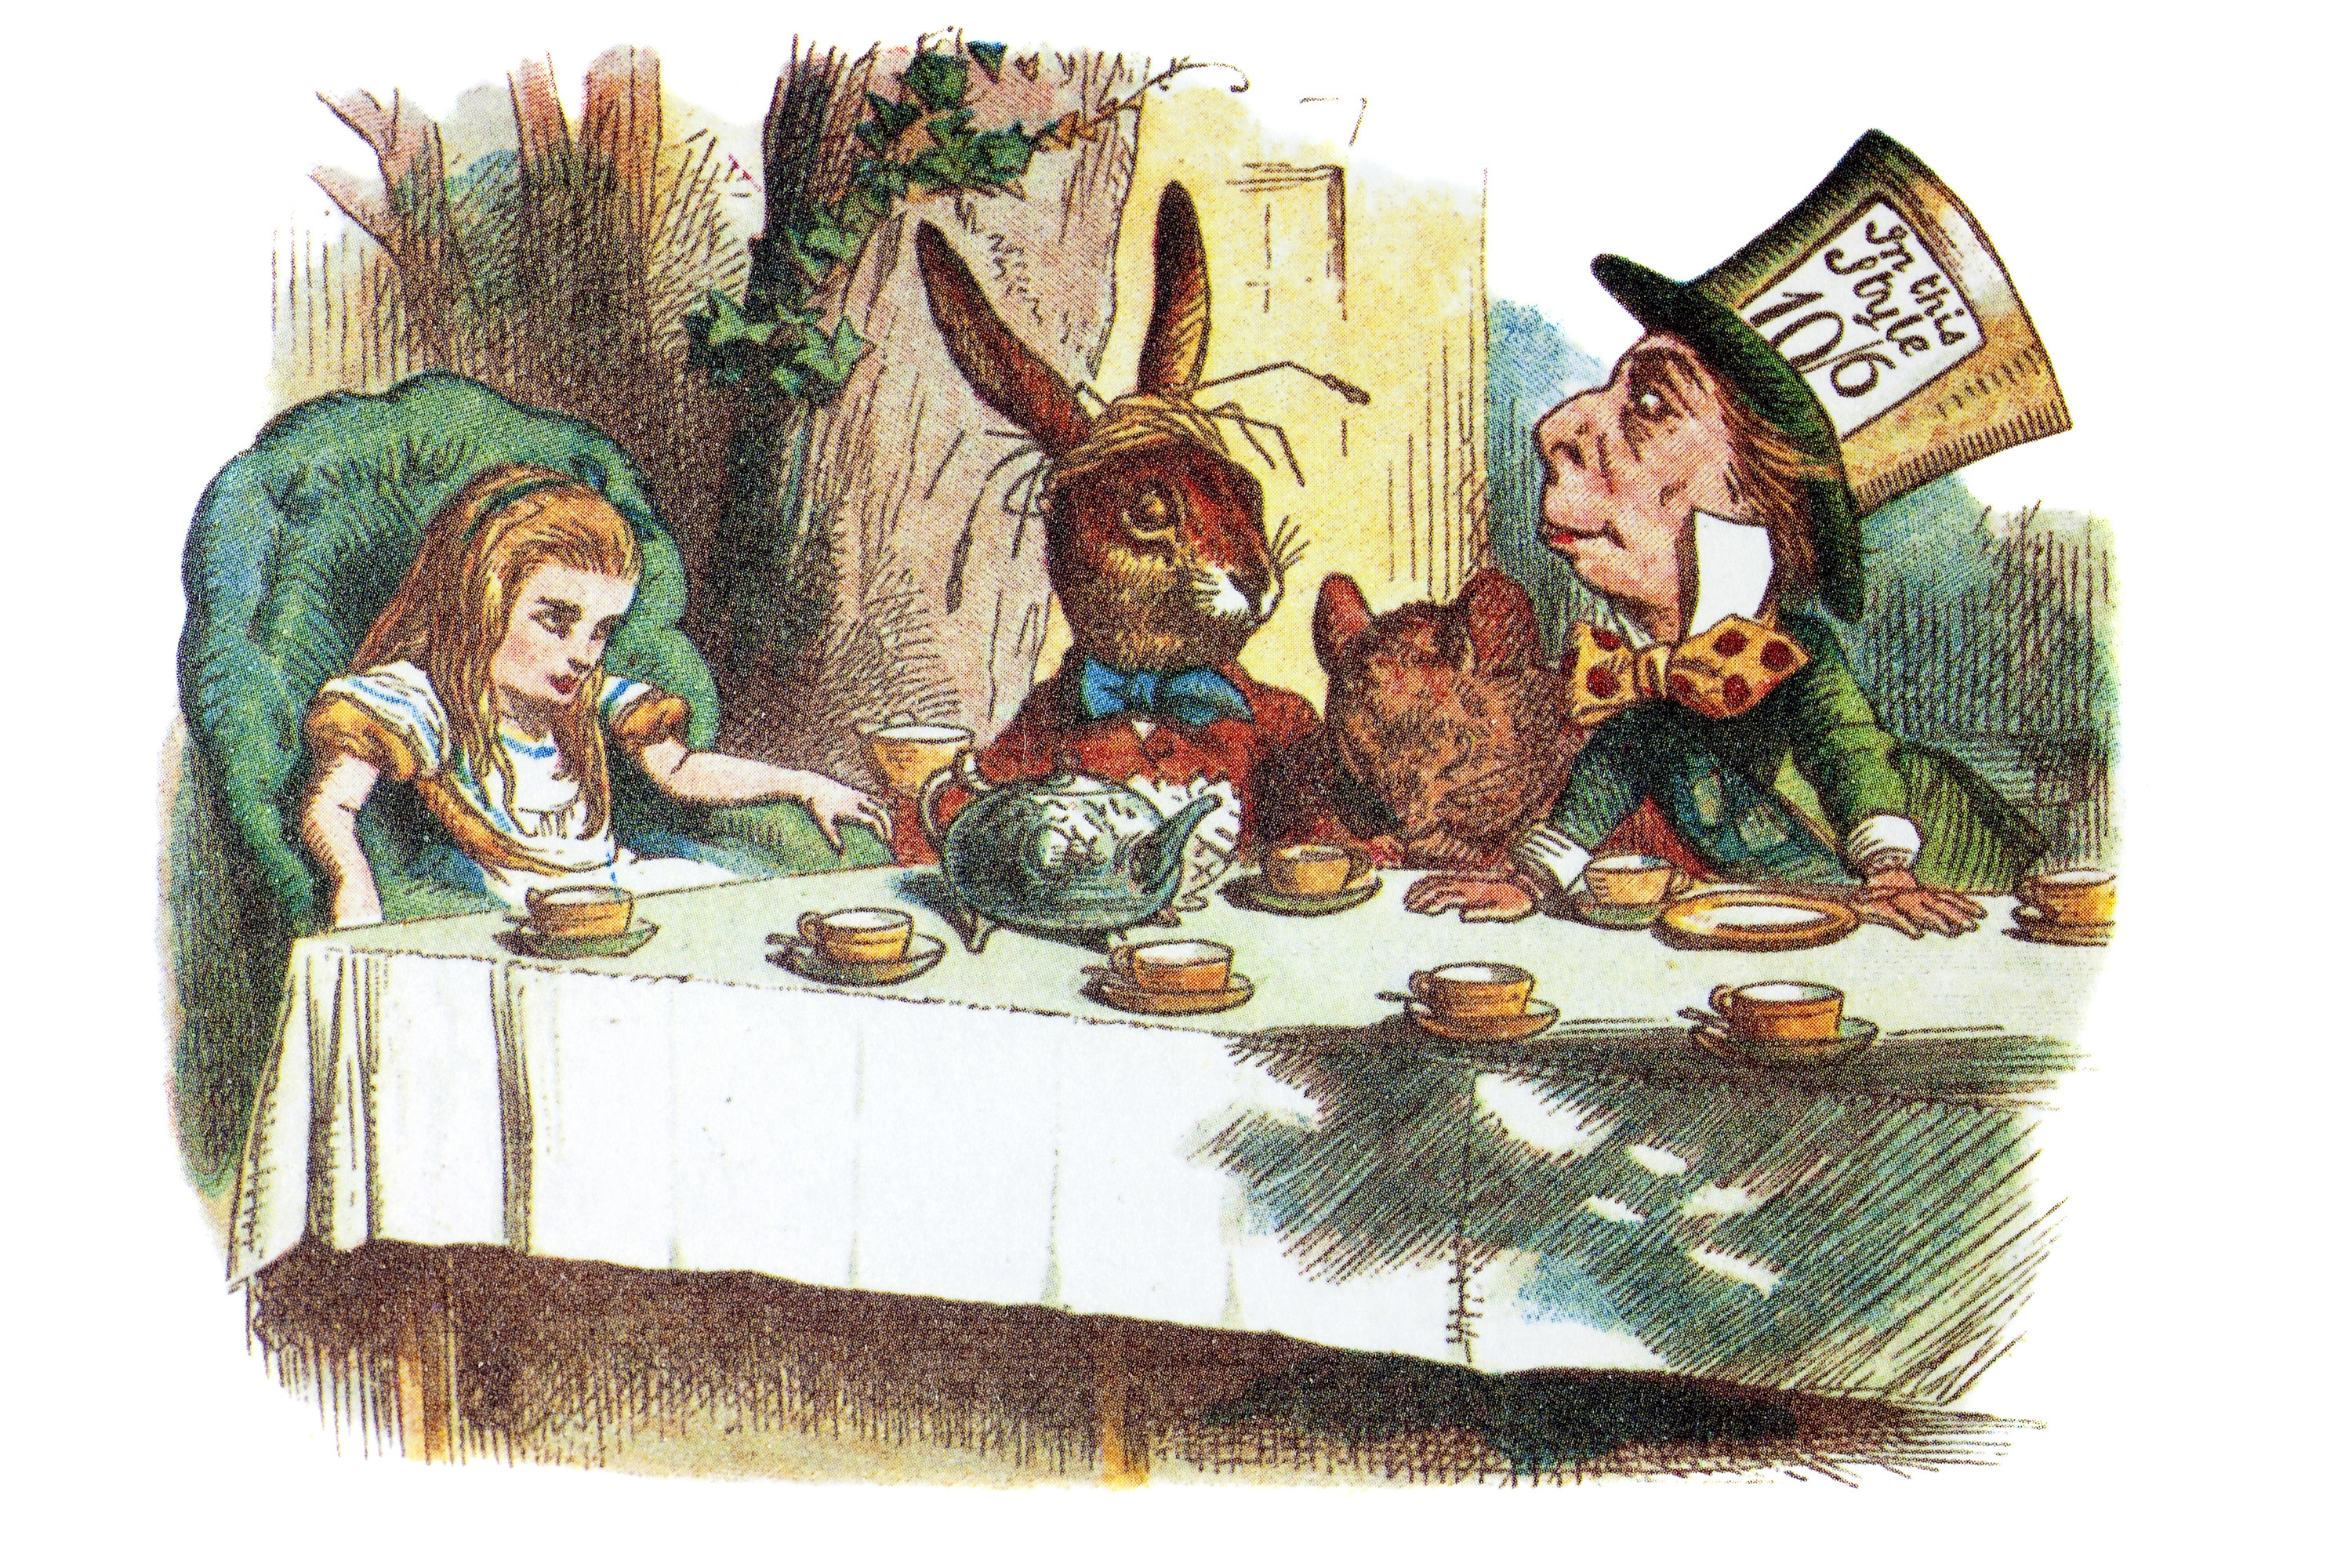 An illustration of Alice, the White Rabbit, and the Mad Hatter having tea